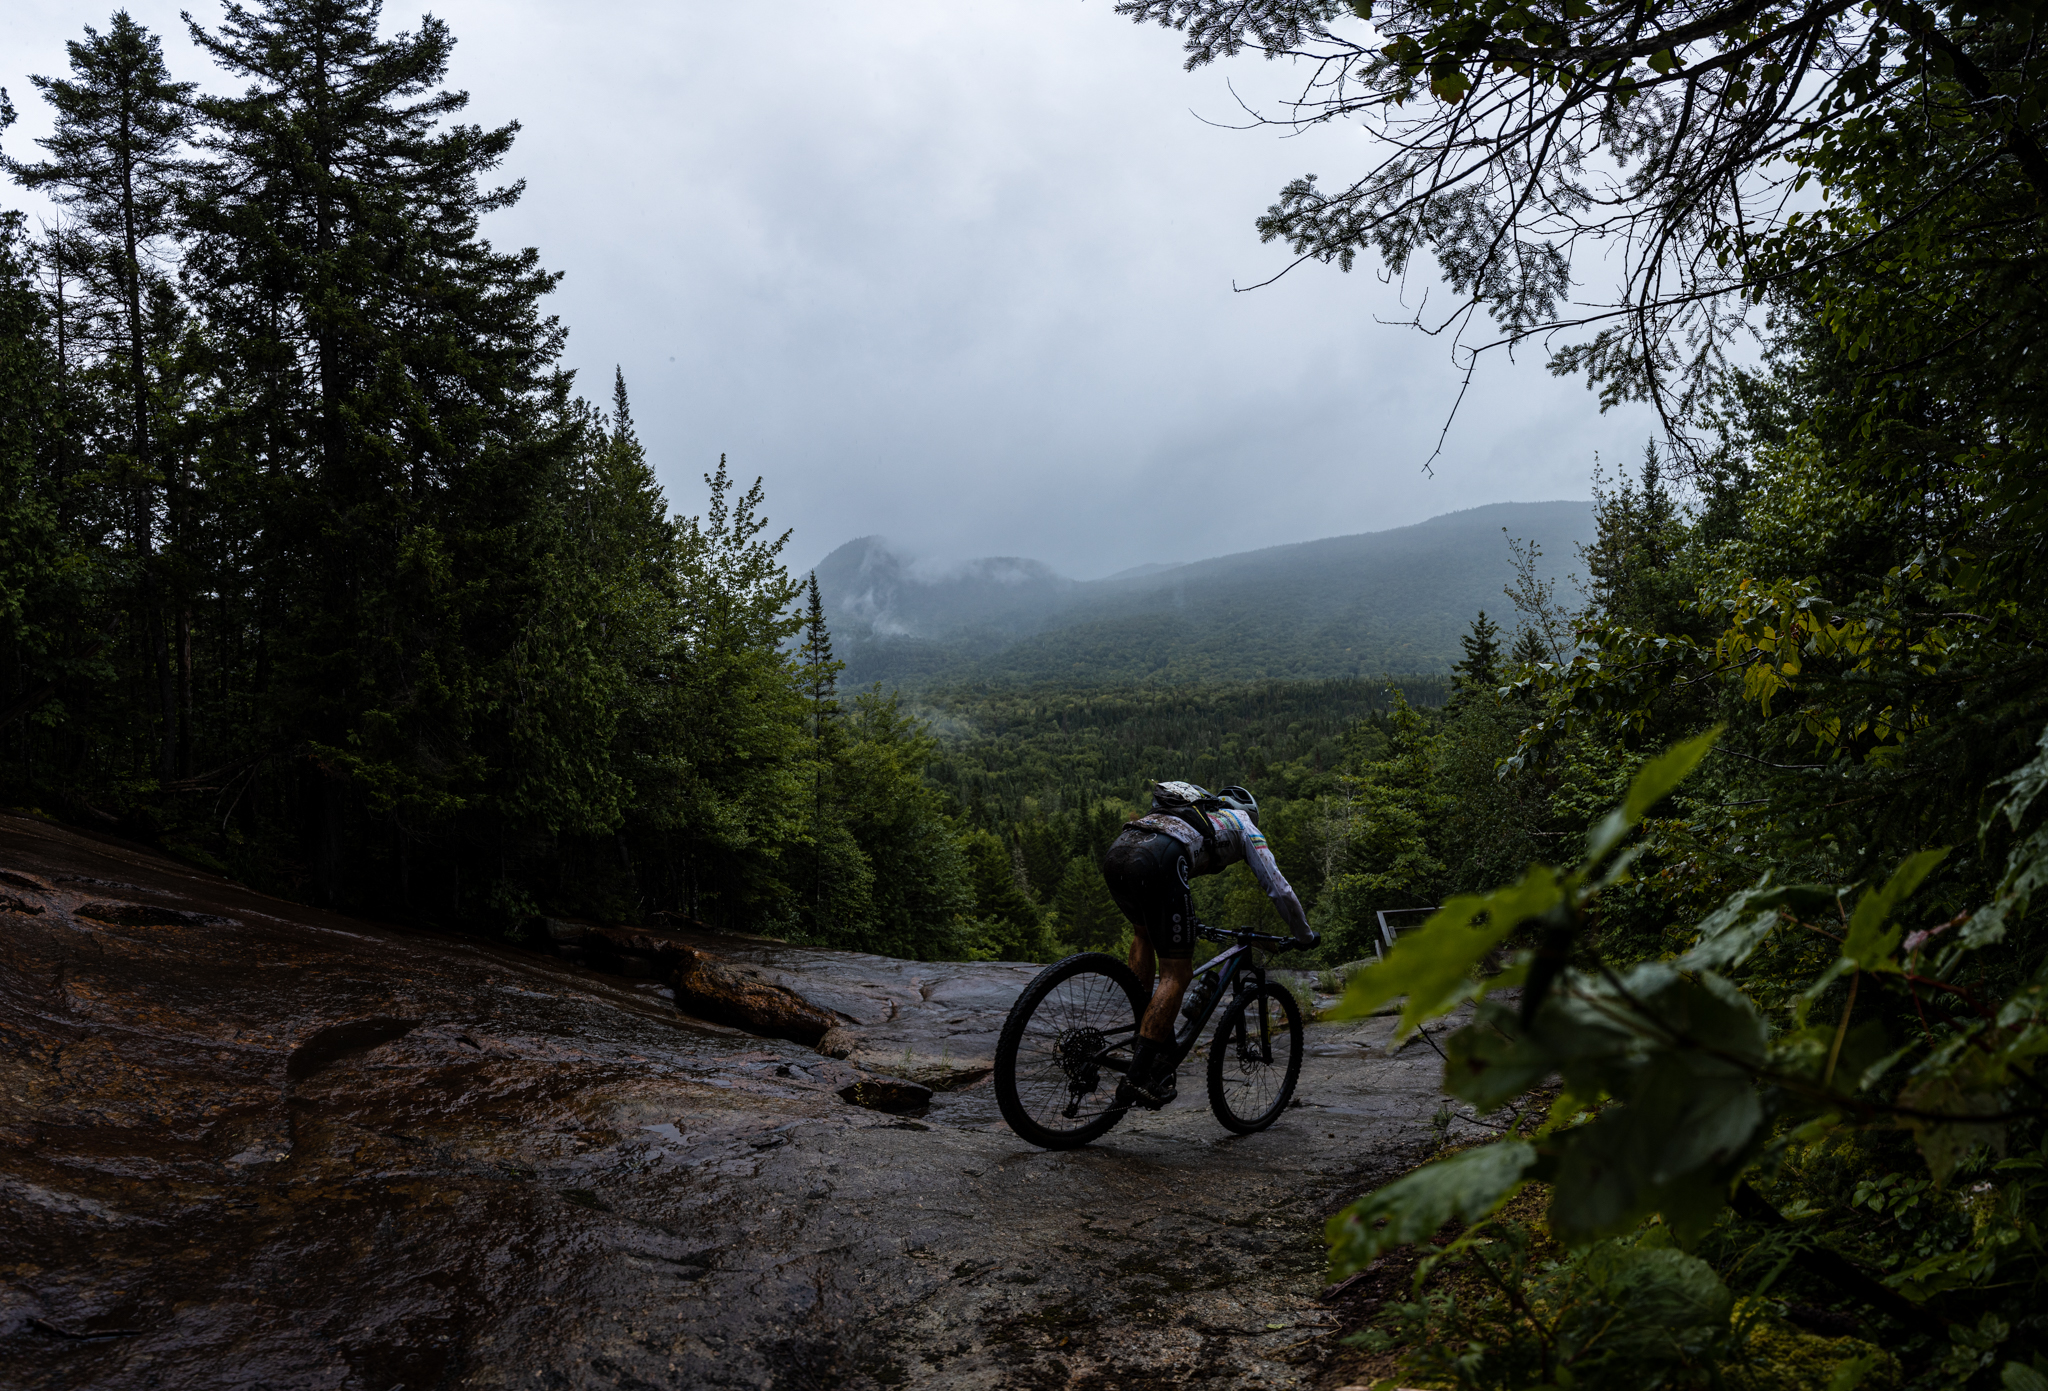 A cyclist enjoying the outdoor sport of mountain biking on the Légende trail, one of the most epic trails in Quebec, under the cloud cover of the surrounding mountains.